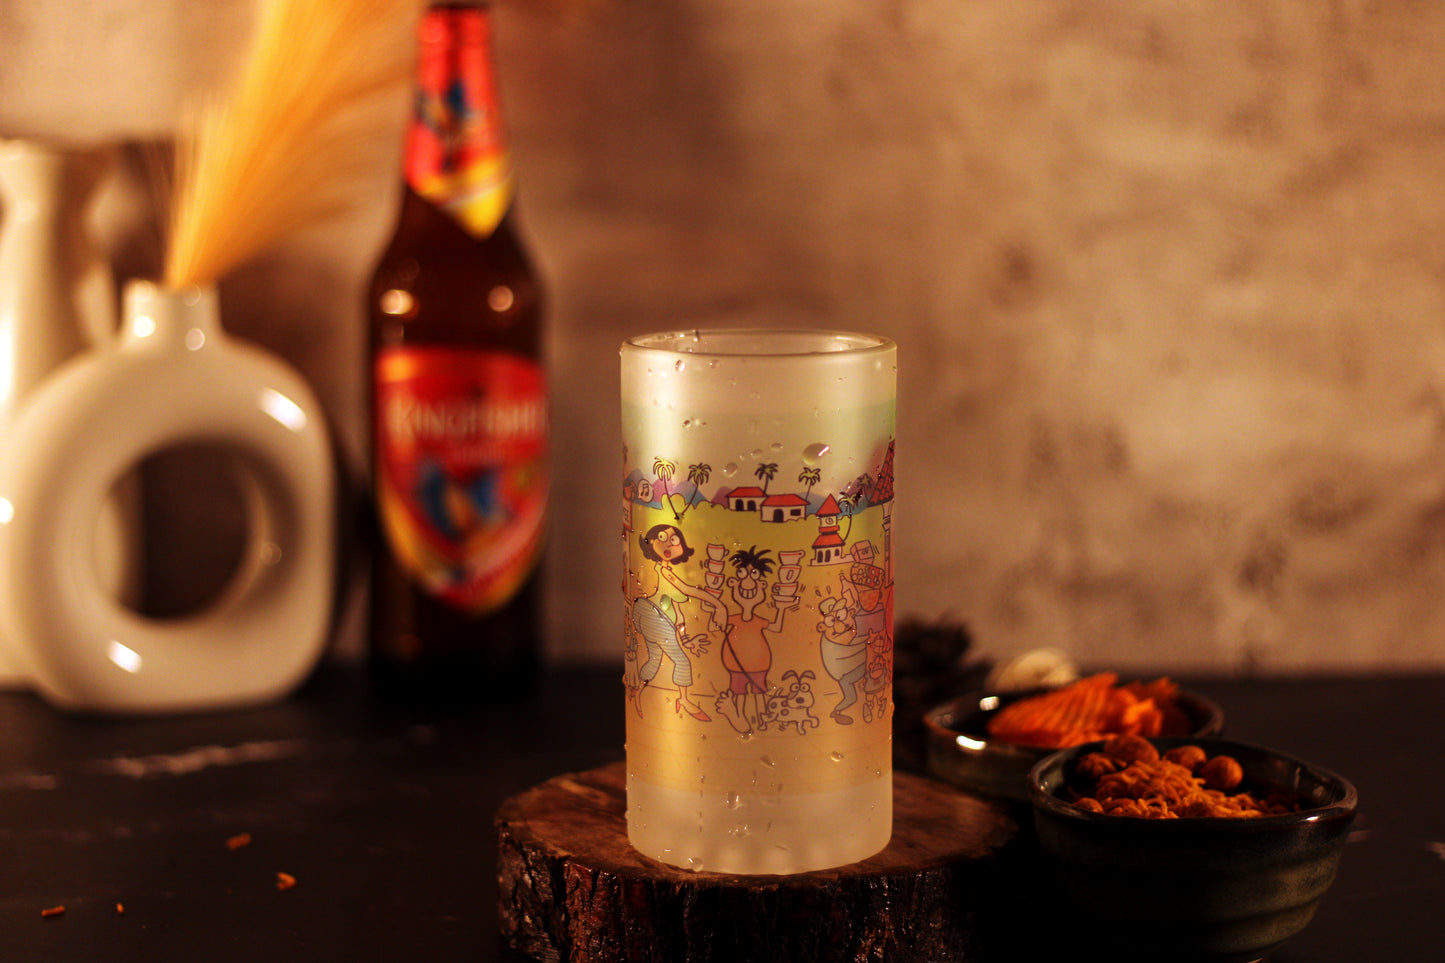 “From Man's Sweat and God's Love, Beer Came Into The World” Cool Beer Glass Mug